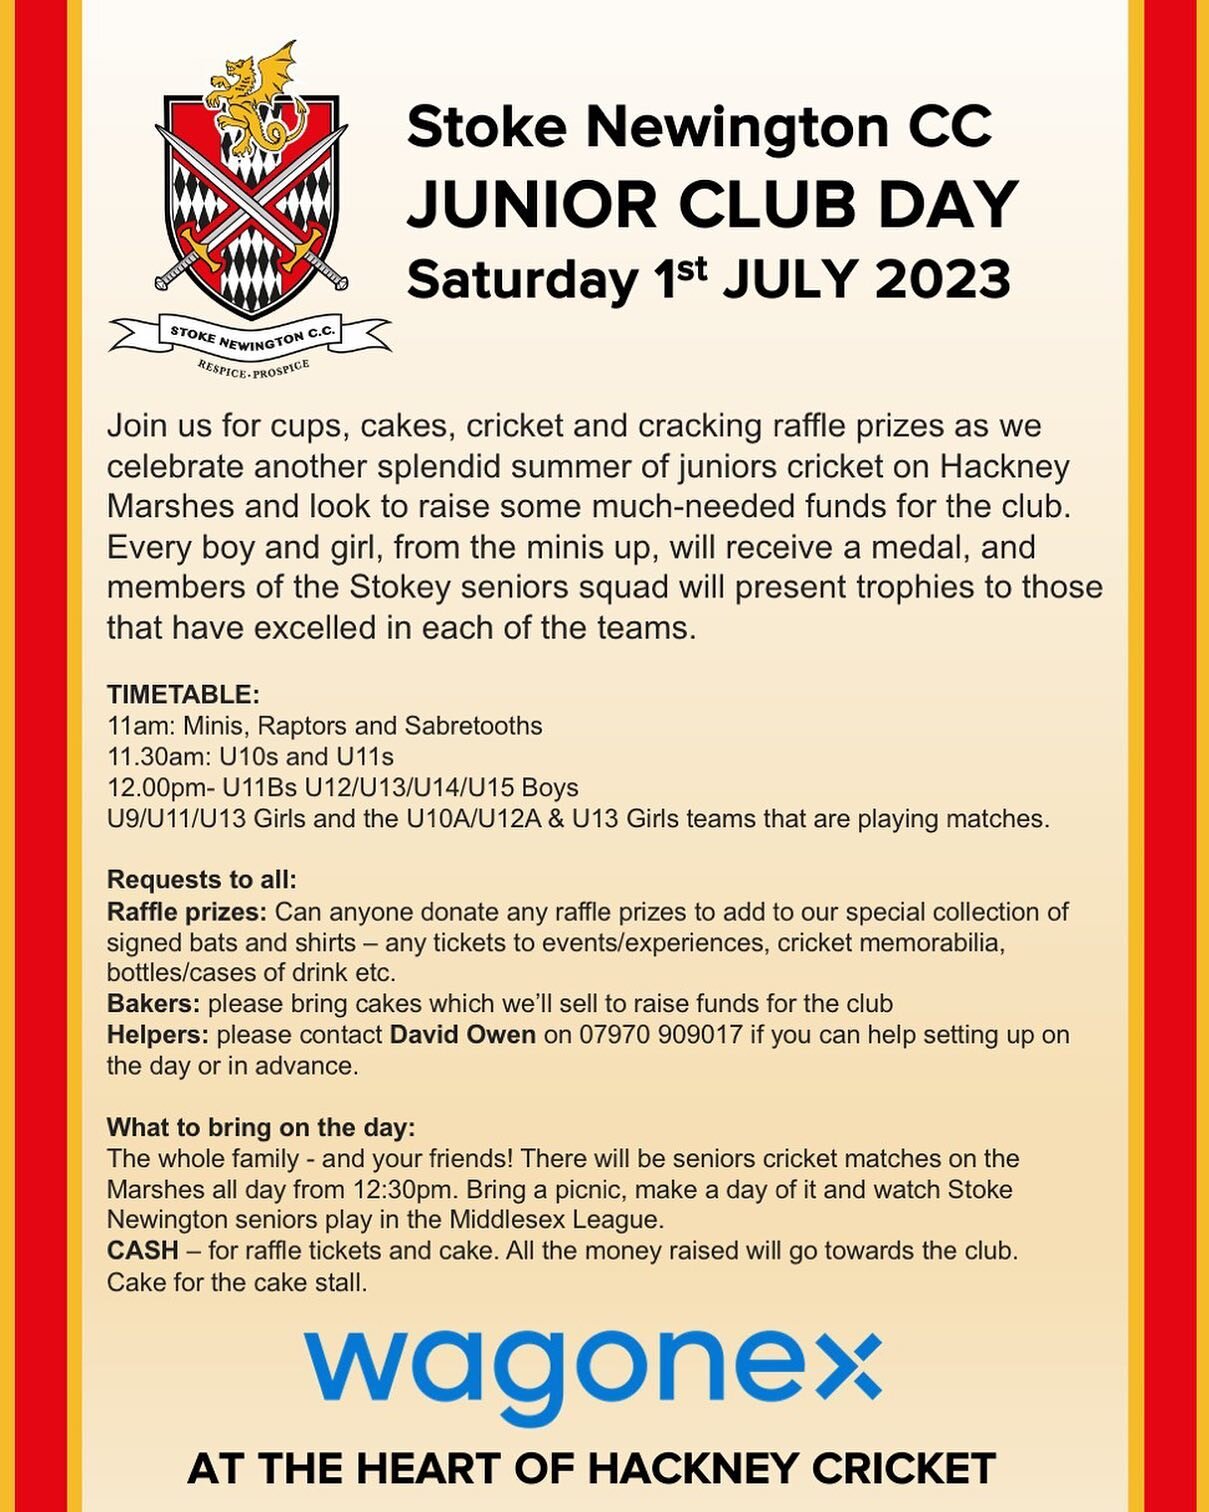 @stokeycricket Junior Club Day 2023. Please come and give your support to what promises to be a celebration of all that&rsquo;s good about Stoke Newington CC #attheheartofhackneycricket @wagonex